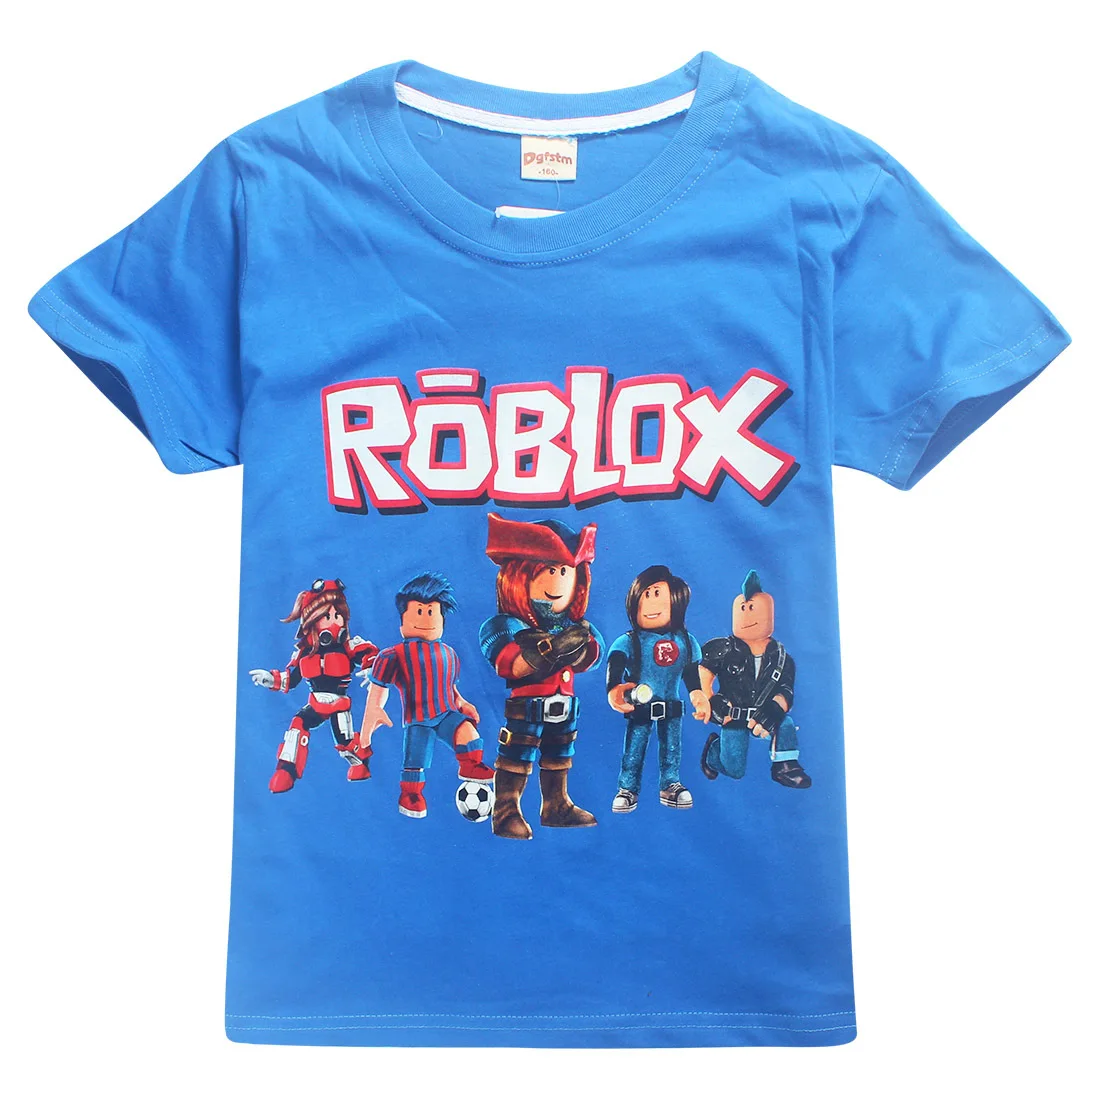 Qoo10 Bringing The Best To You - roupa do goku roblox